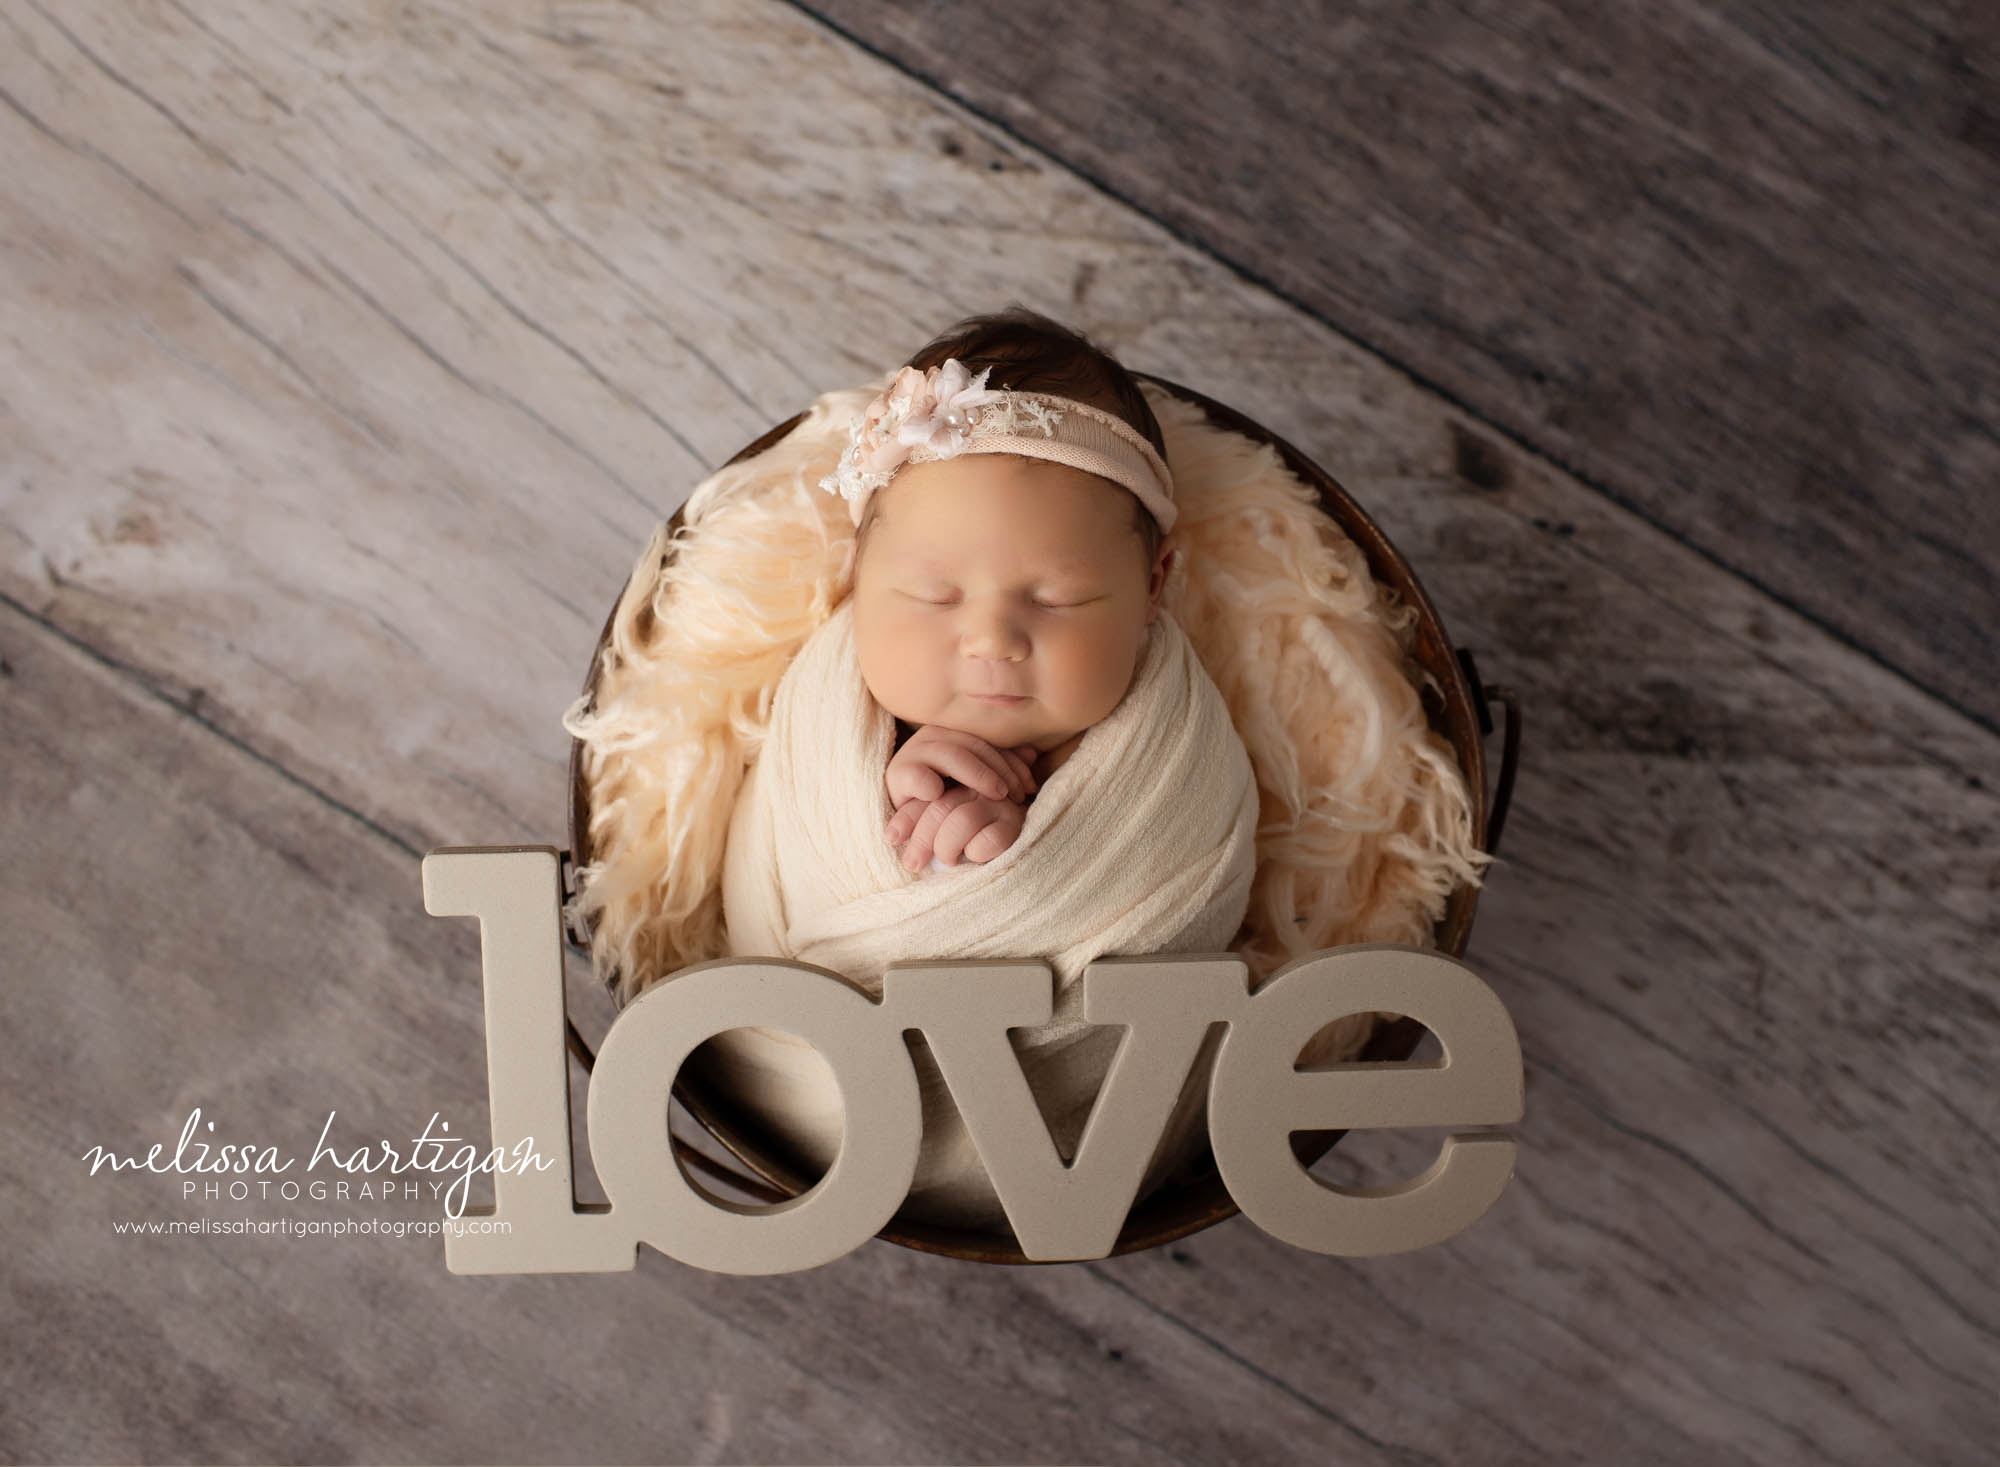 Newborn baby girl wrapped in peach color posed in bucket with love newborn prop